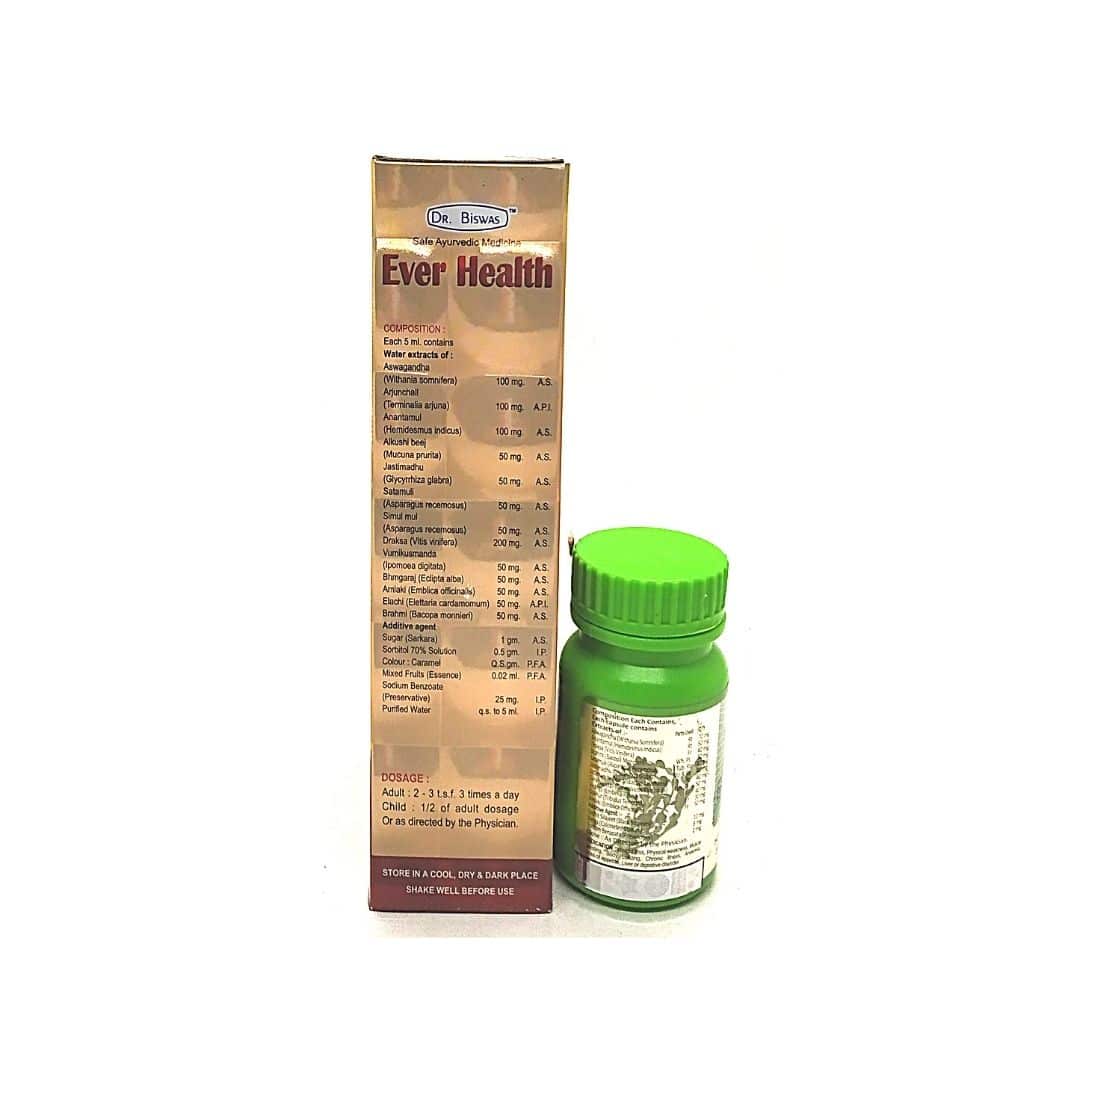 Dr. Biswas Ayurvedic Ever Health Tonic & capsule Use for Strong Immunity & Insomnia,Loss Of Appetite,Enhances Body Strength.